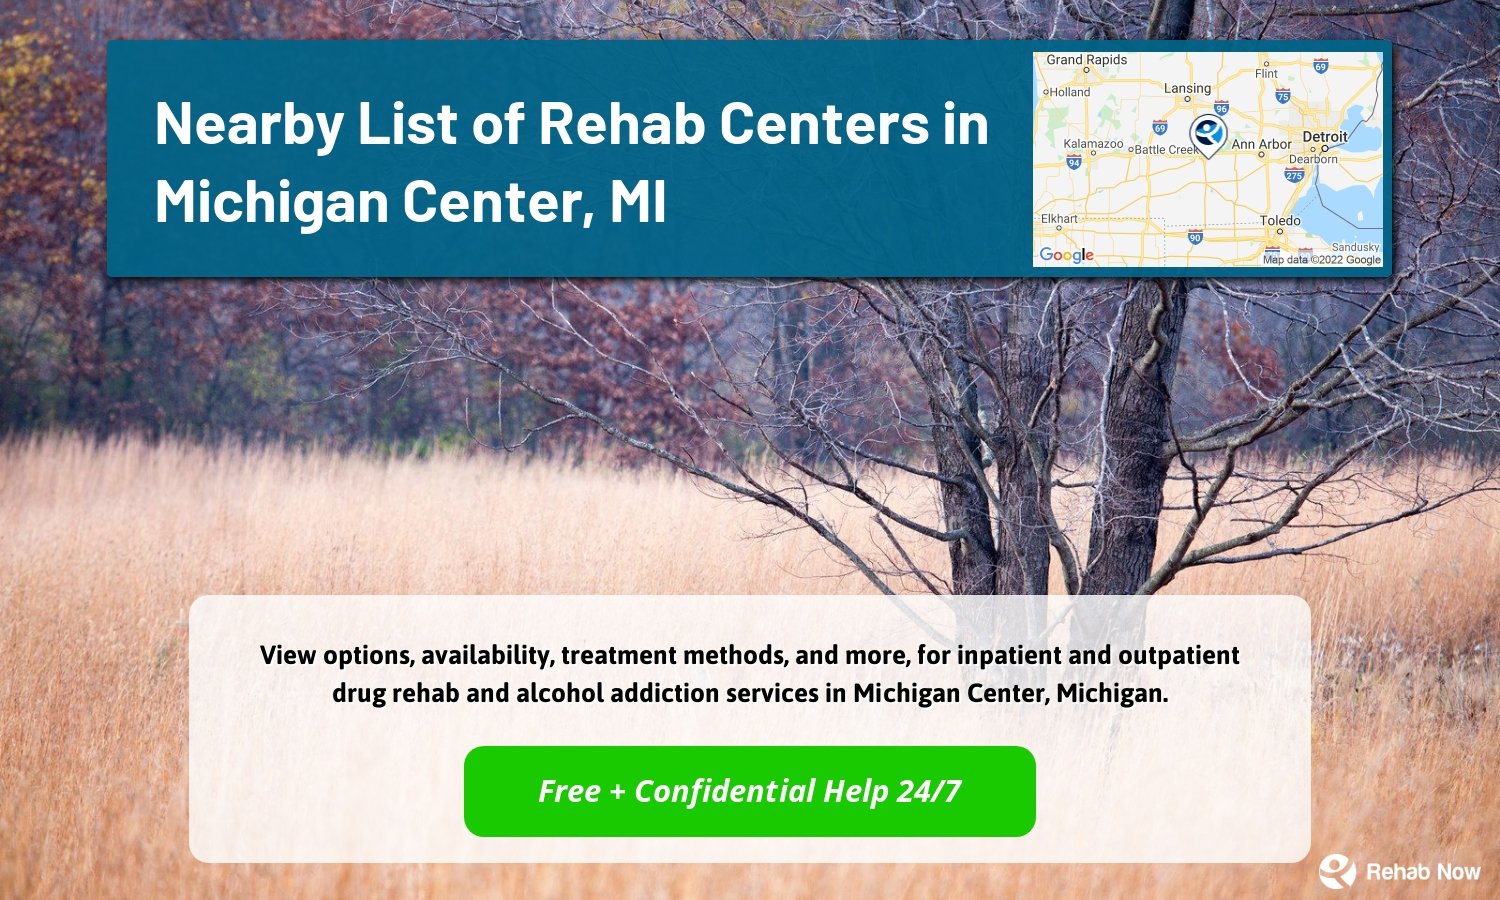 View options, availability, treatment methods, and more, for inpatient and outpatient drug rehab and alcohol addiction services in Michigan Center, Michigan.